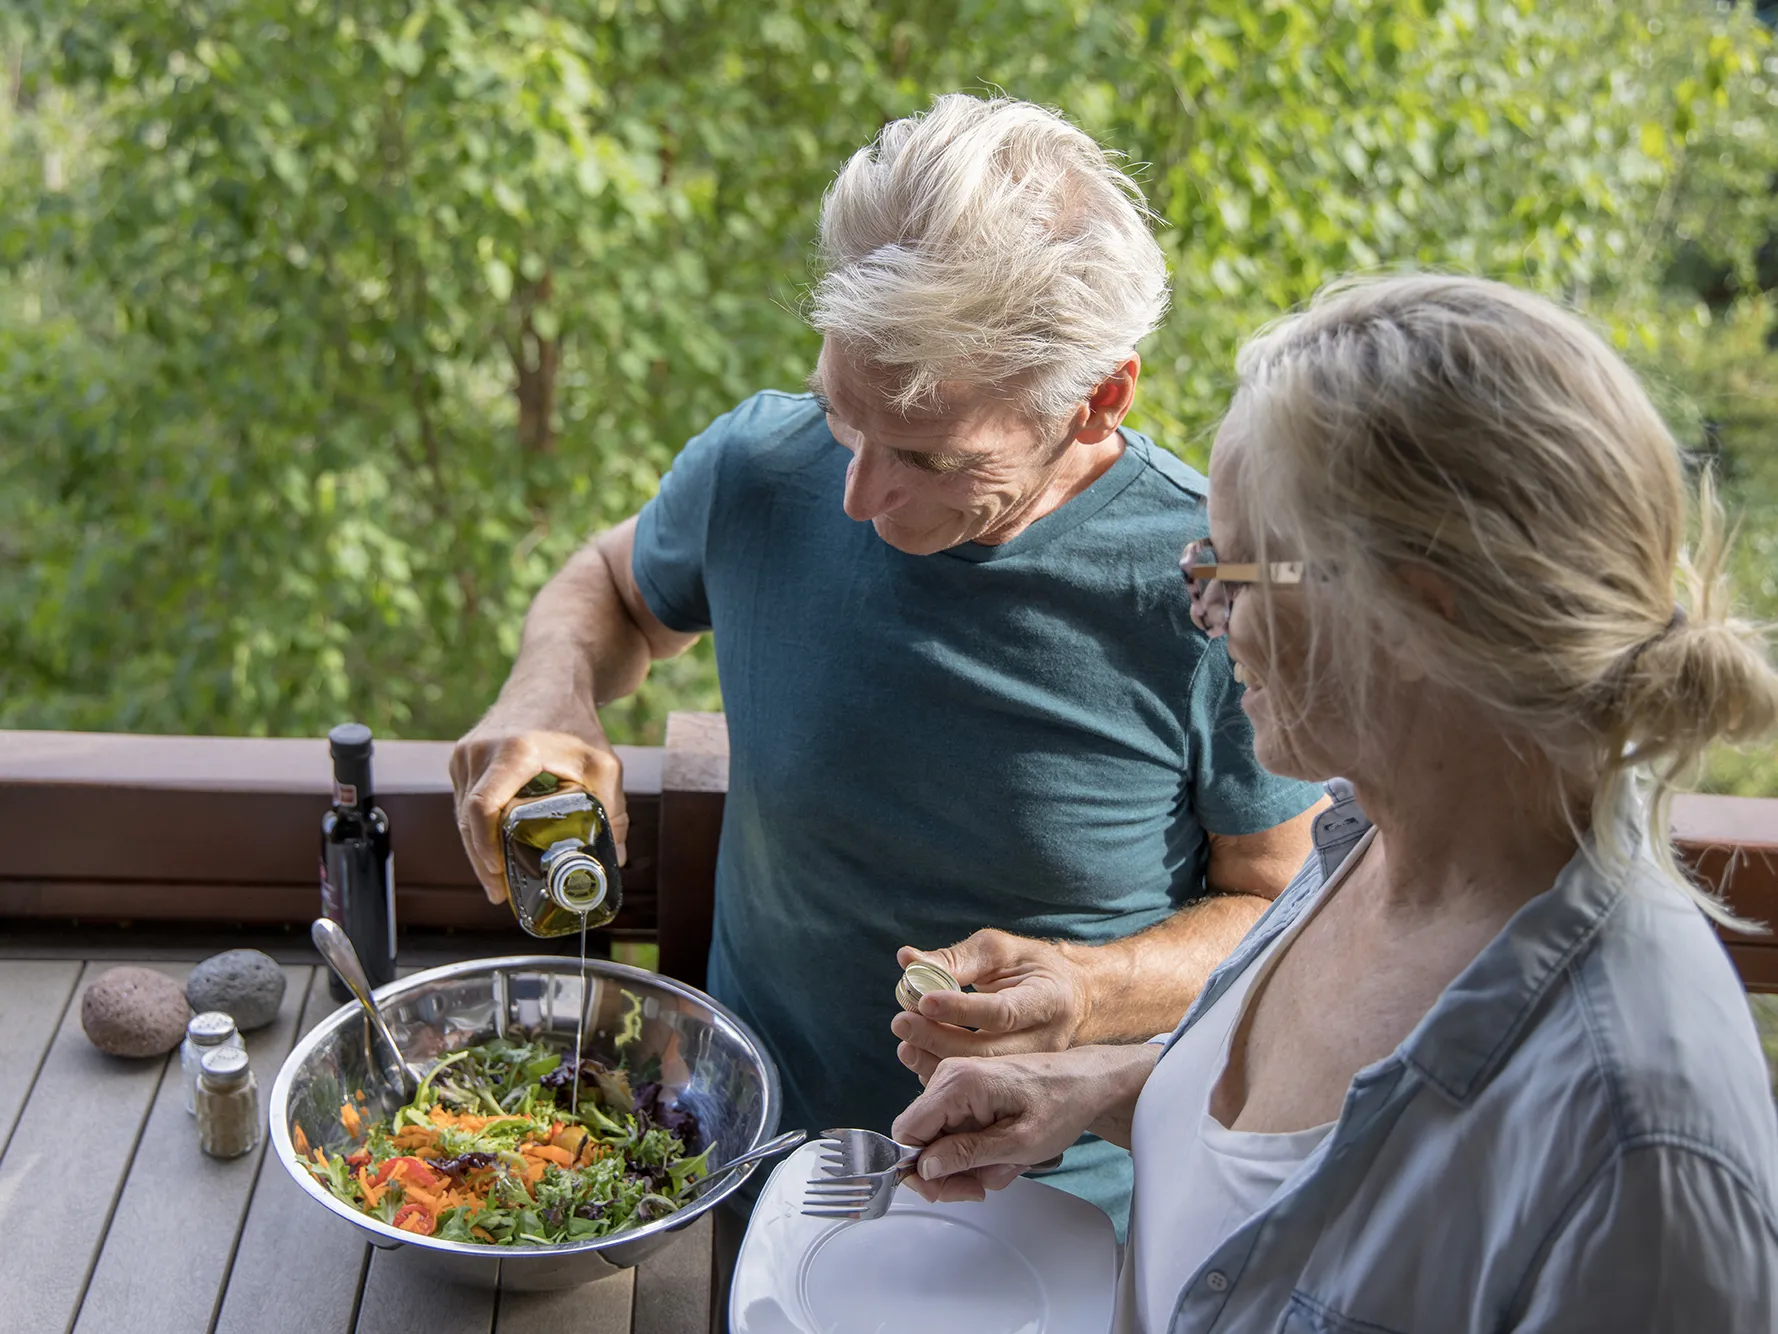 Outside on a porch or deck, two older white people stand around a metal mixing bowl with a salad of greens, carrots and cherry tomatoes. The man is drizzling olive oil onto the salad and the woman holds plates and forks. Because the photo was taken from slightly above them and they’re both looking down at the salad, you can’t see their eyes.